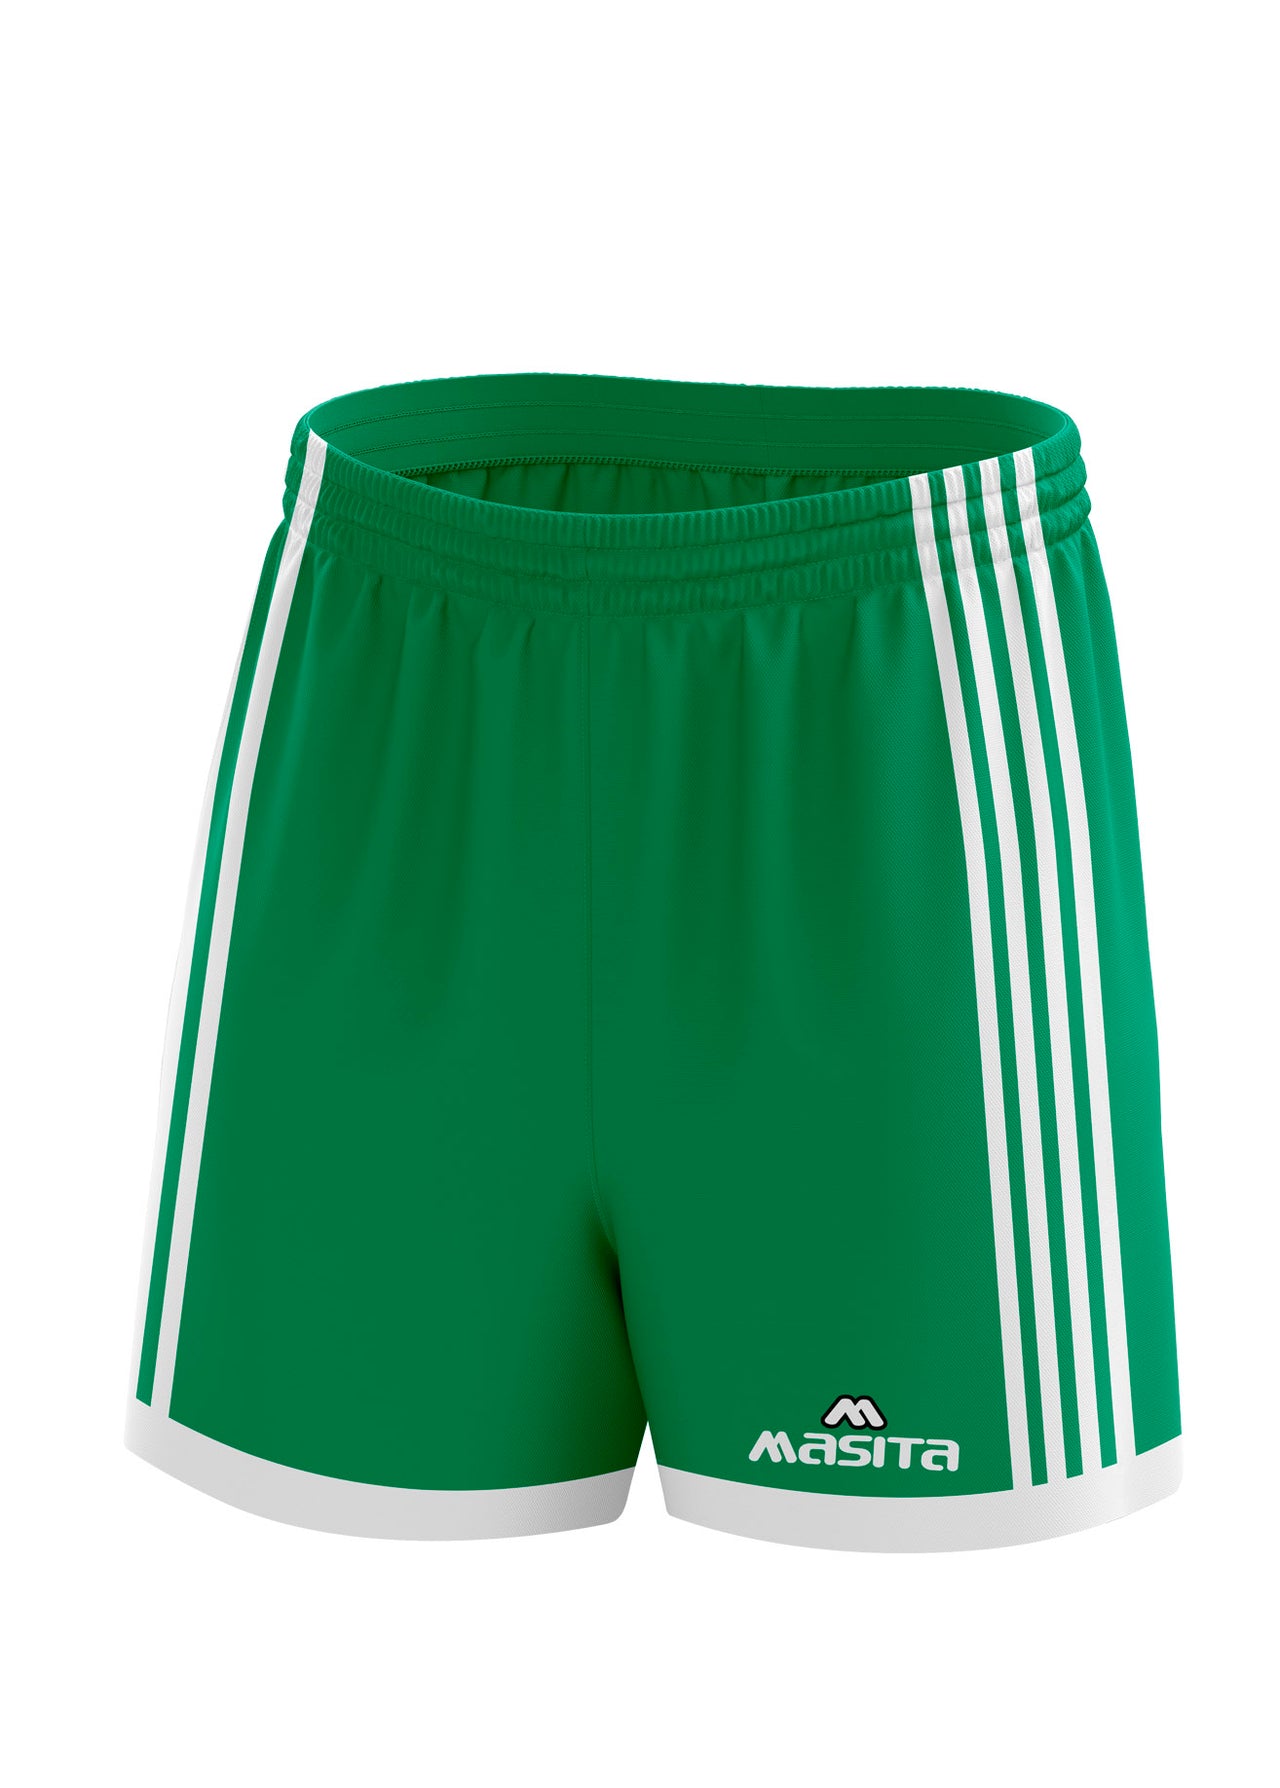 Solo Gaelic Shorts Green/White Adult